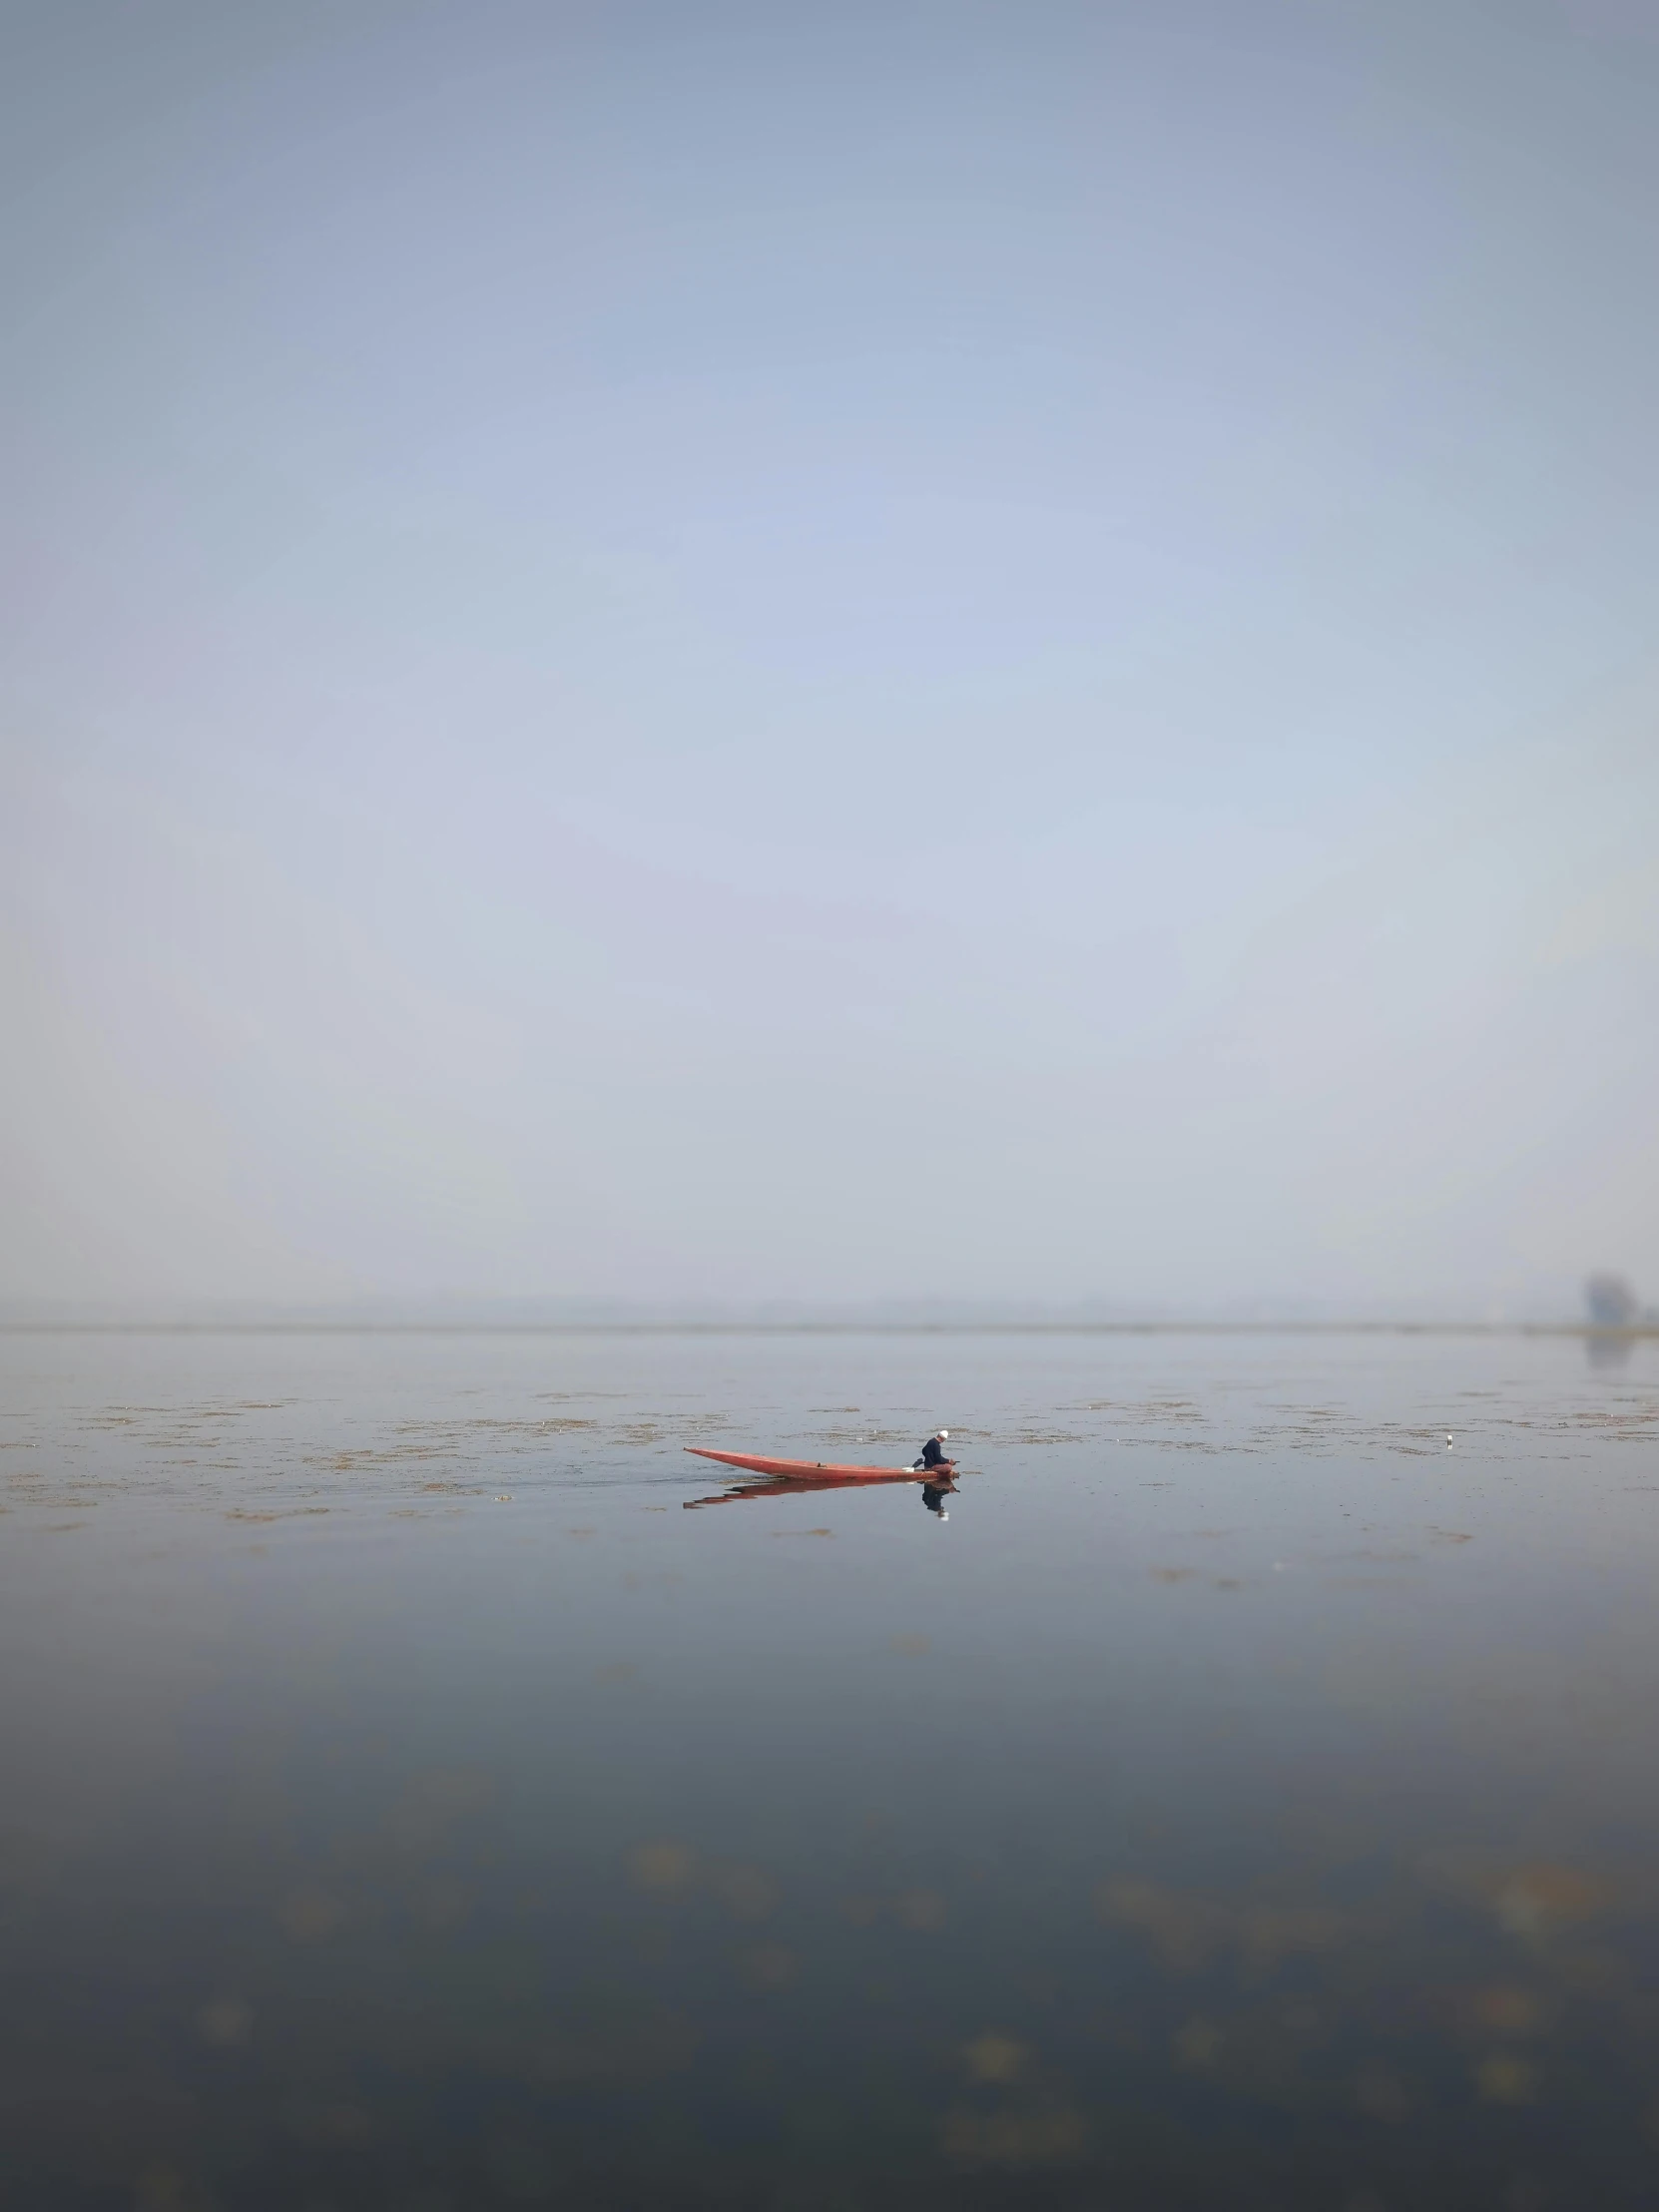 a person in a kayak in the middle of a body of water, by Tobias Stimmer, minimalism, guwahati, slightly foggy, promo image, joel sternfeld